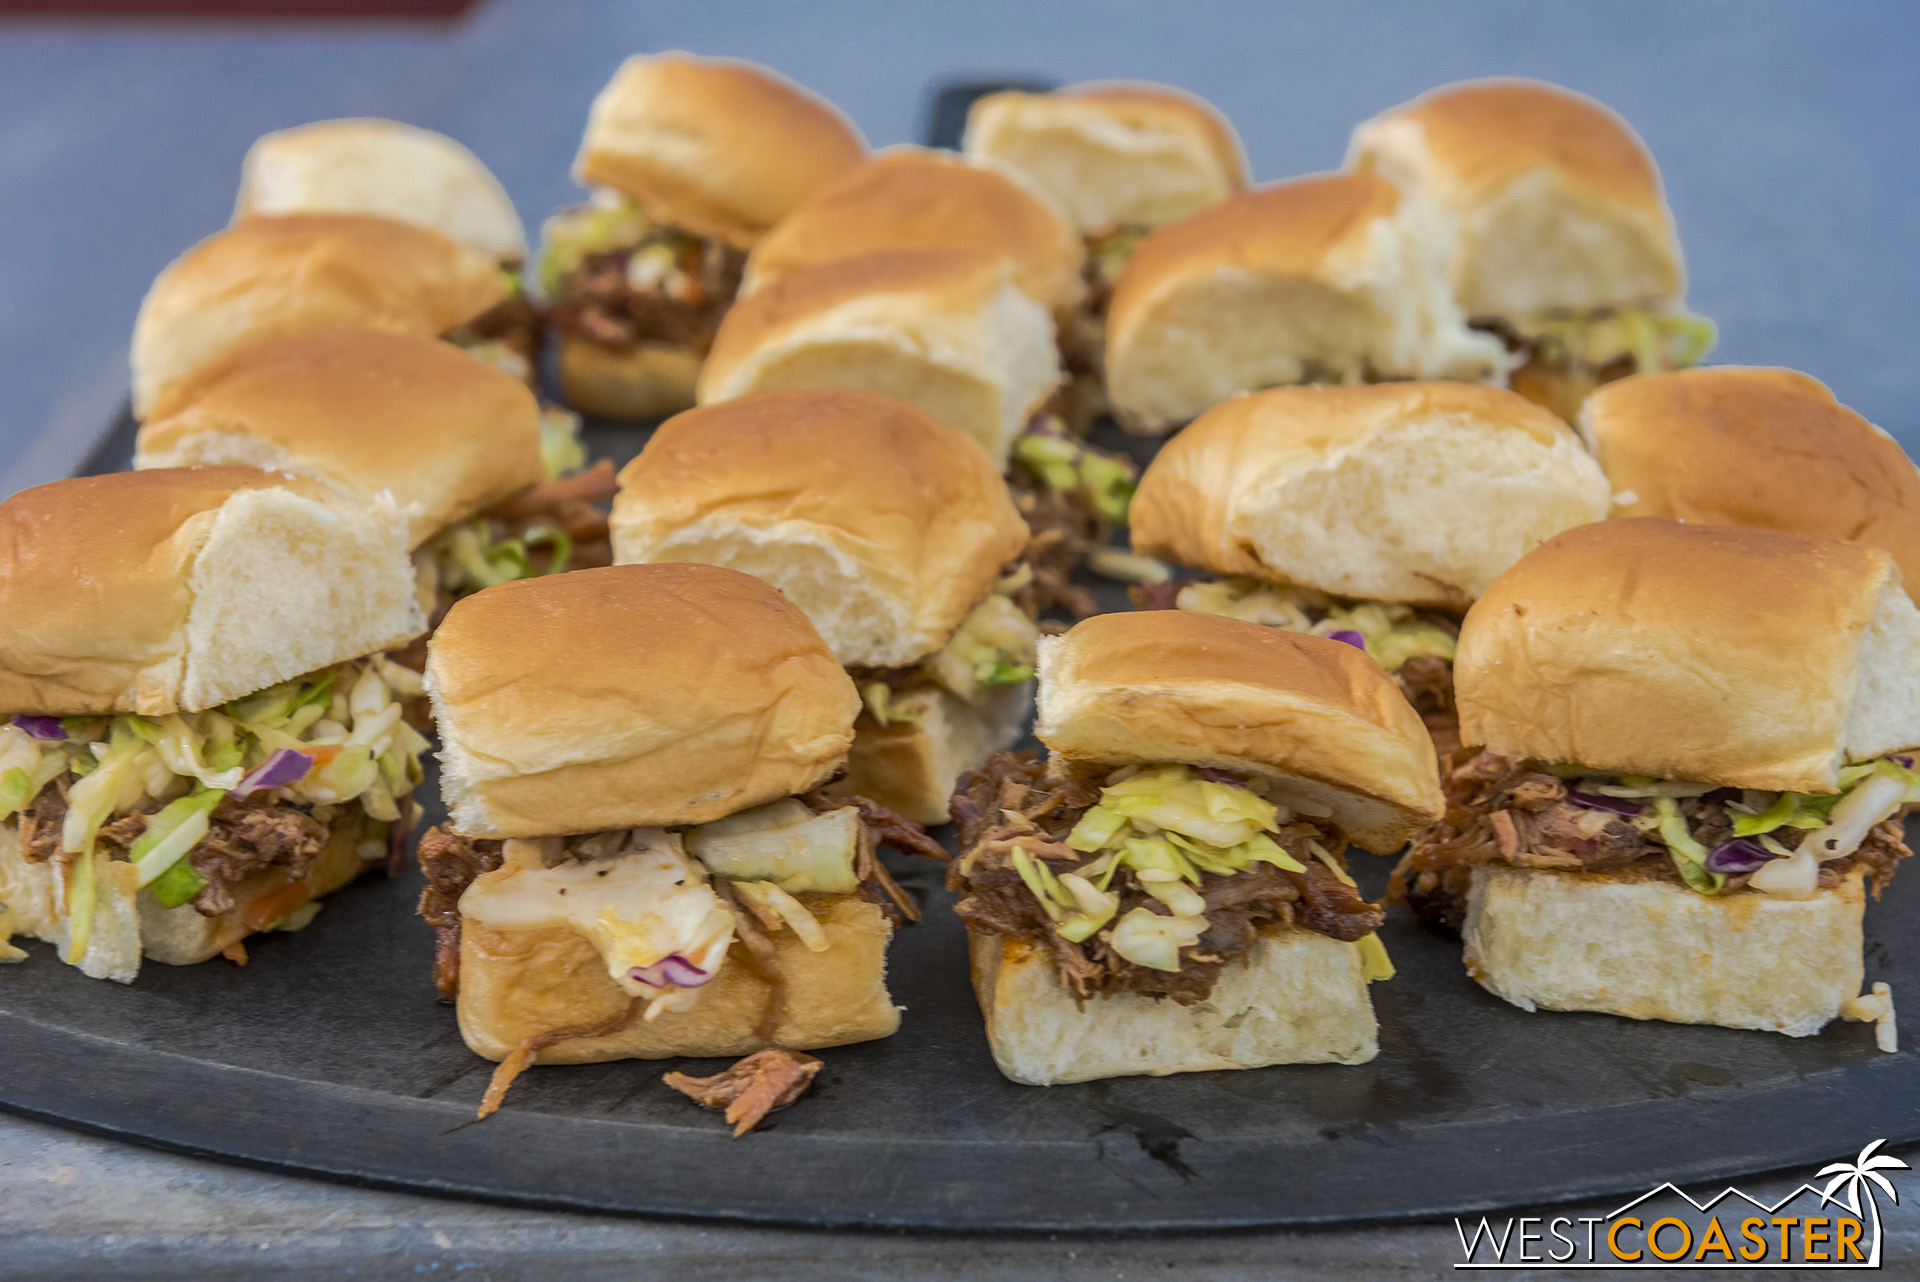  A selection of upcoming concessions items include Pulled Pork BBQ Sliders with Cole Slaw on Sweet Rolls. 